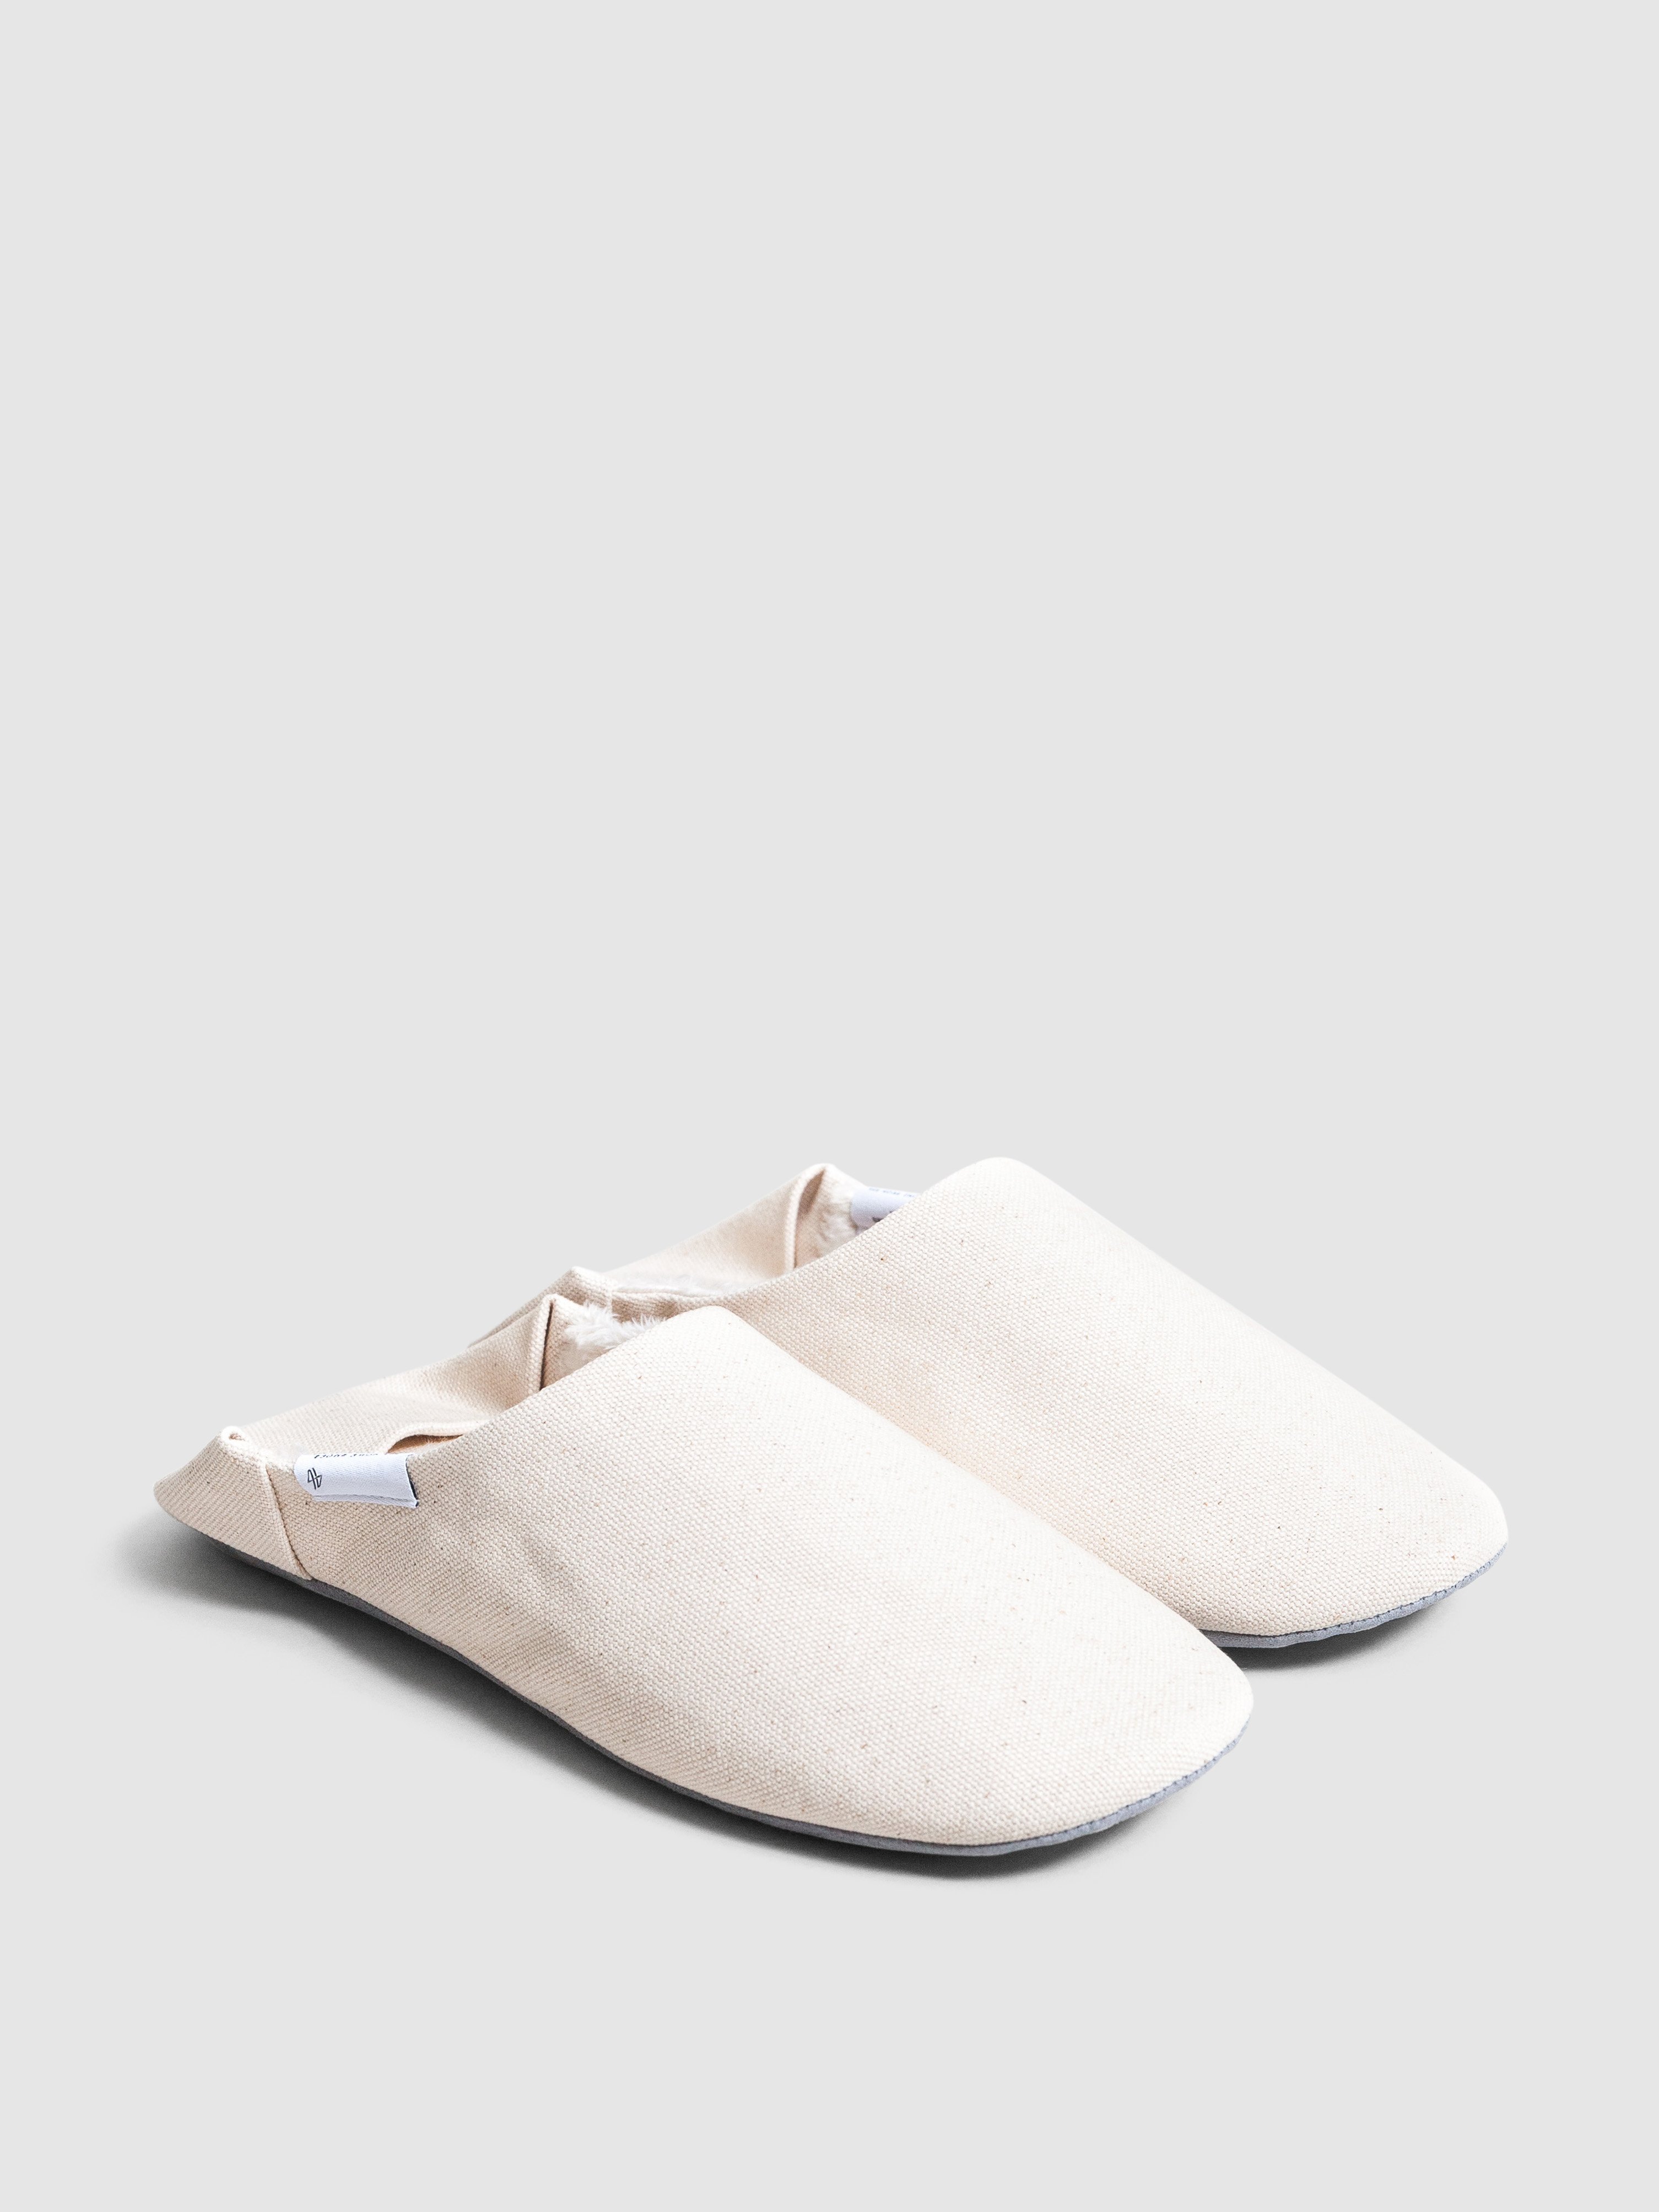 ABE Sangyo ABE Canvas Home Shoes, Wool 